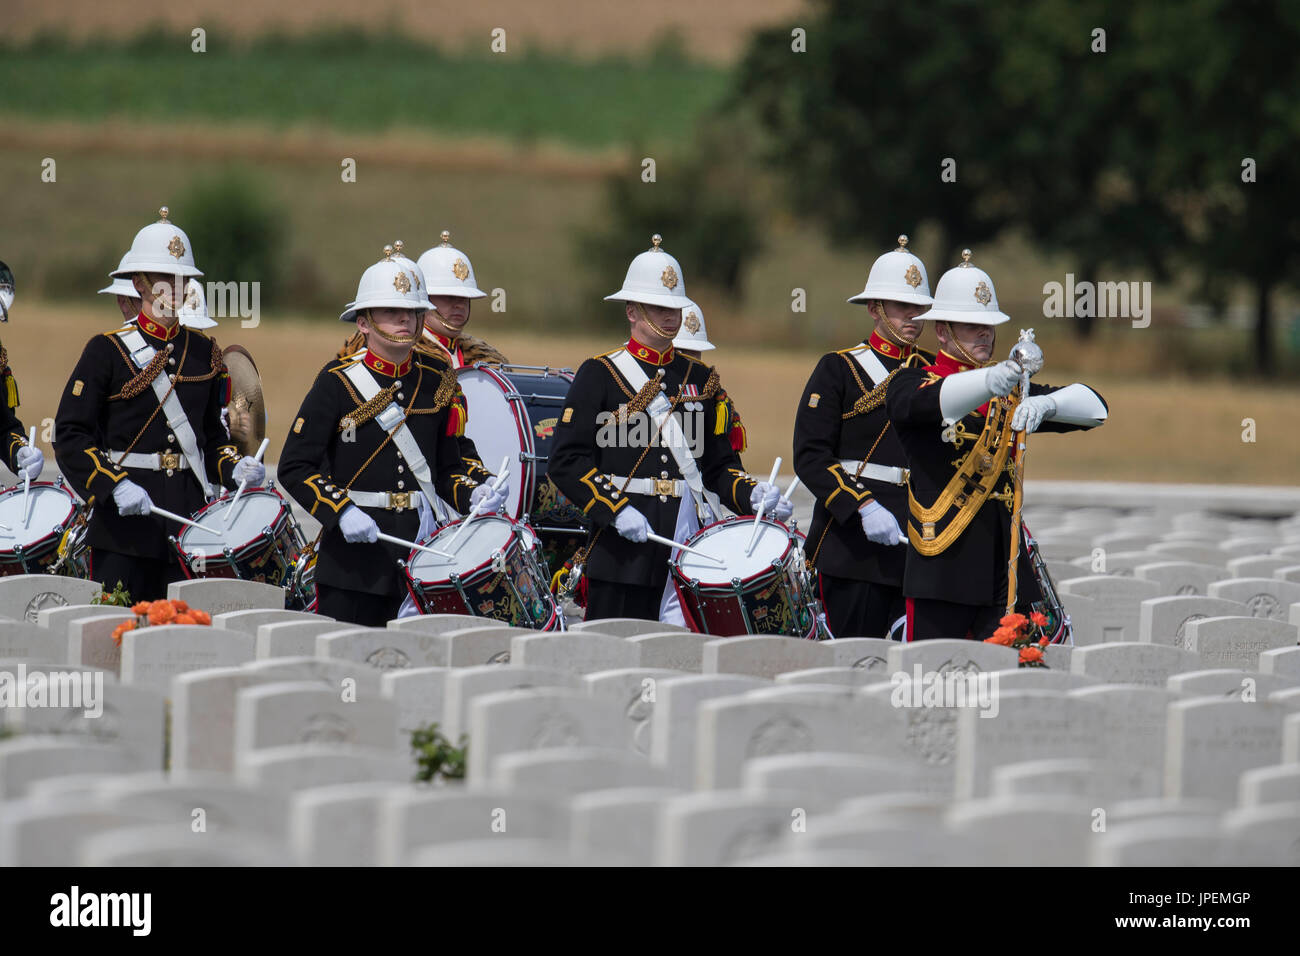 British Troops take part in the commemoration events for the World War One Battle of Passchendaele at the Tyne Cot Cemetery near Ypres in Belgium. The military band of the Marines Stock Photo